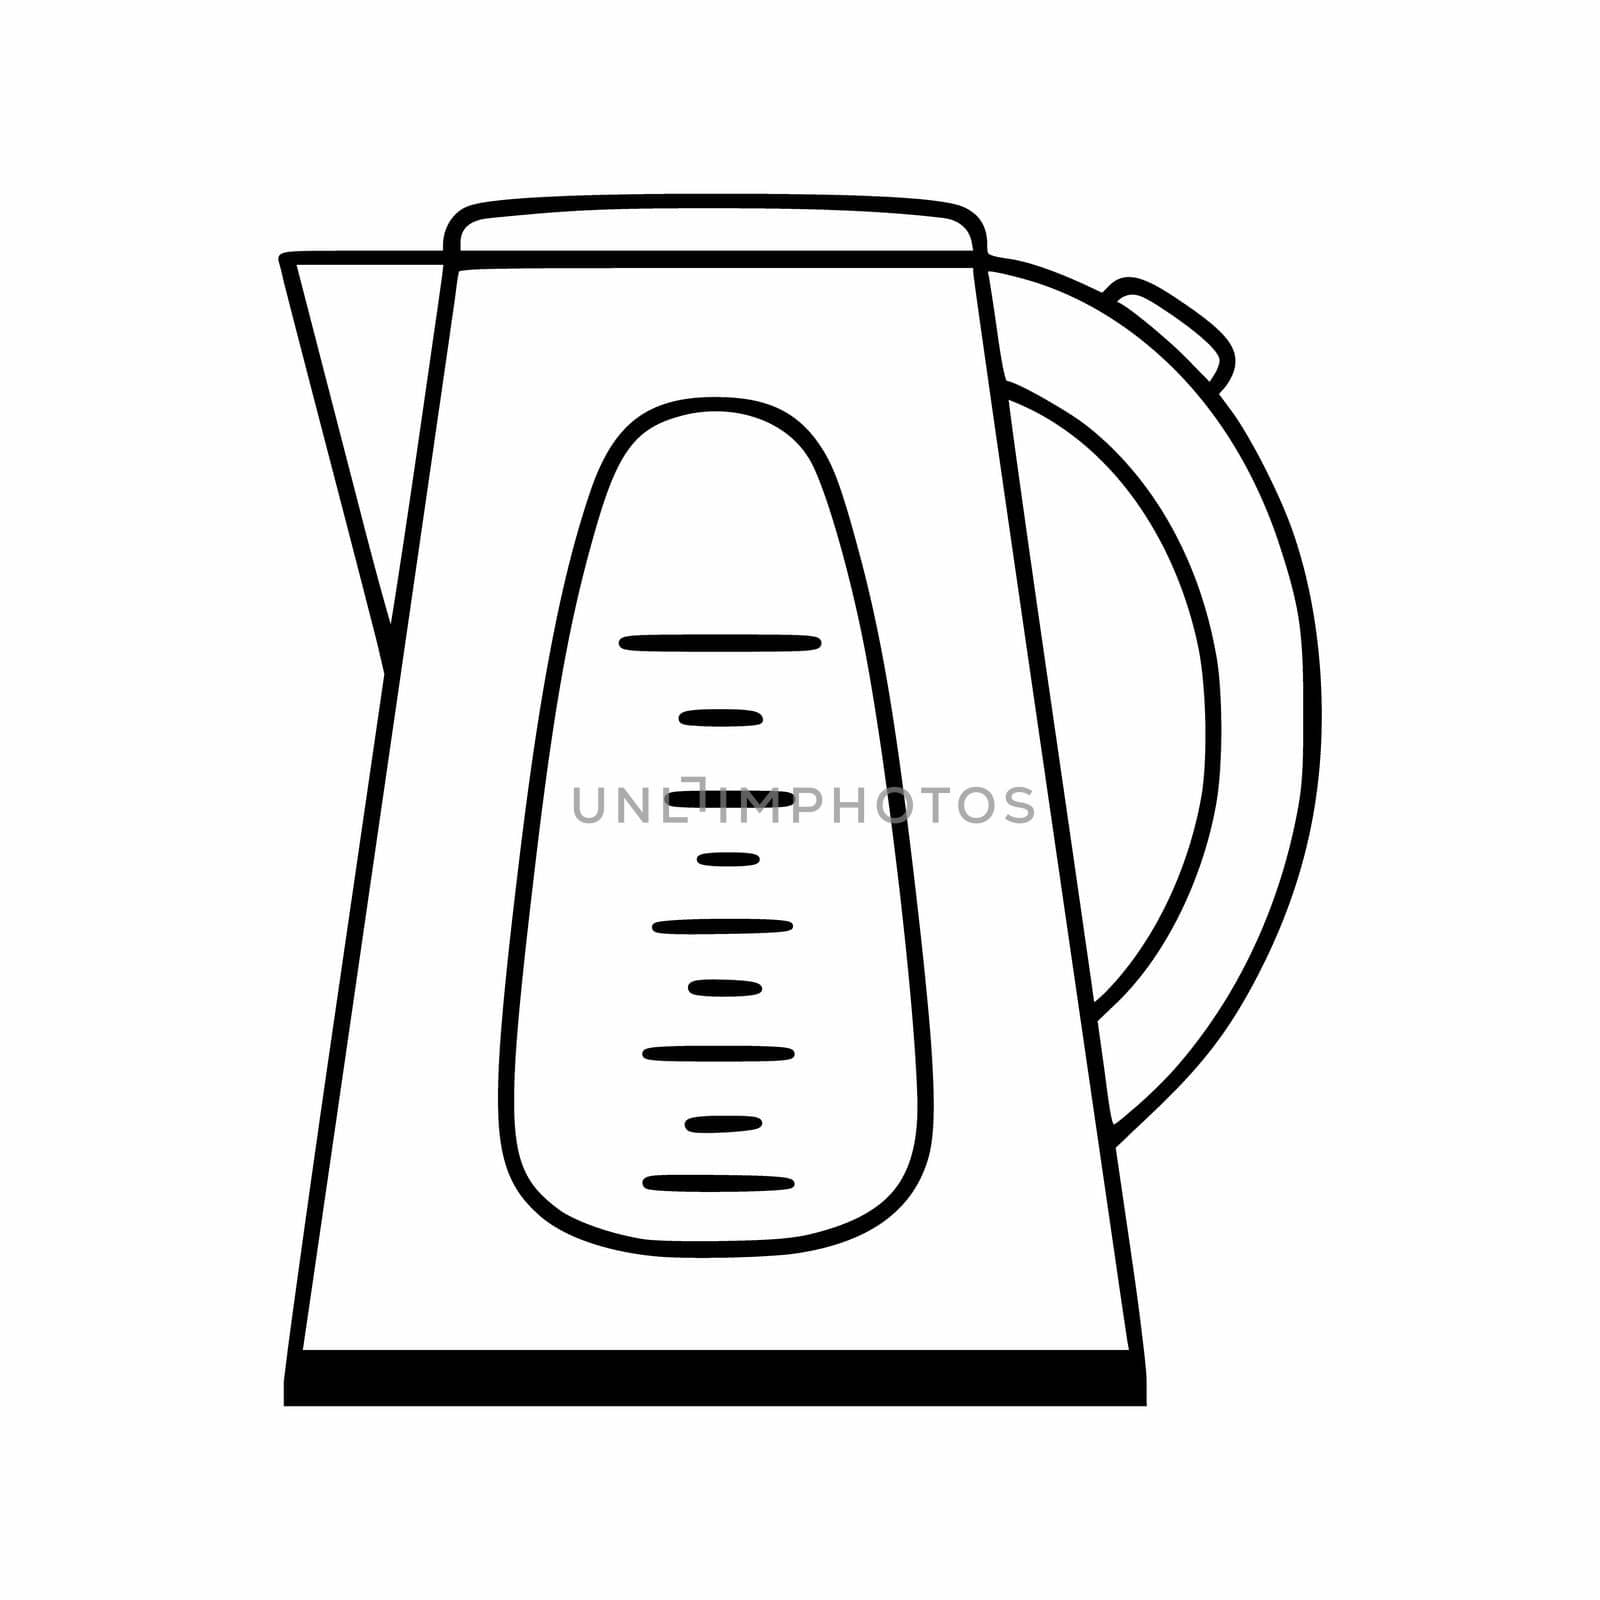 Electric kettle in a linear style. Kitchen appliances for cooking. Vector icon in the doodle style.